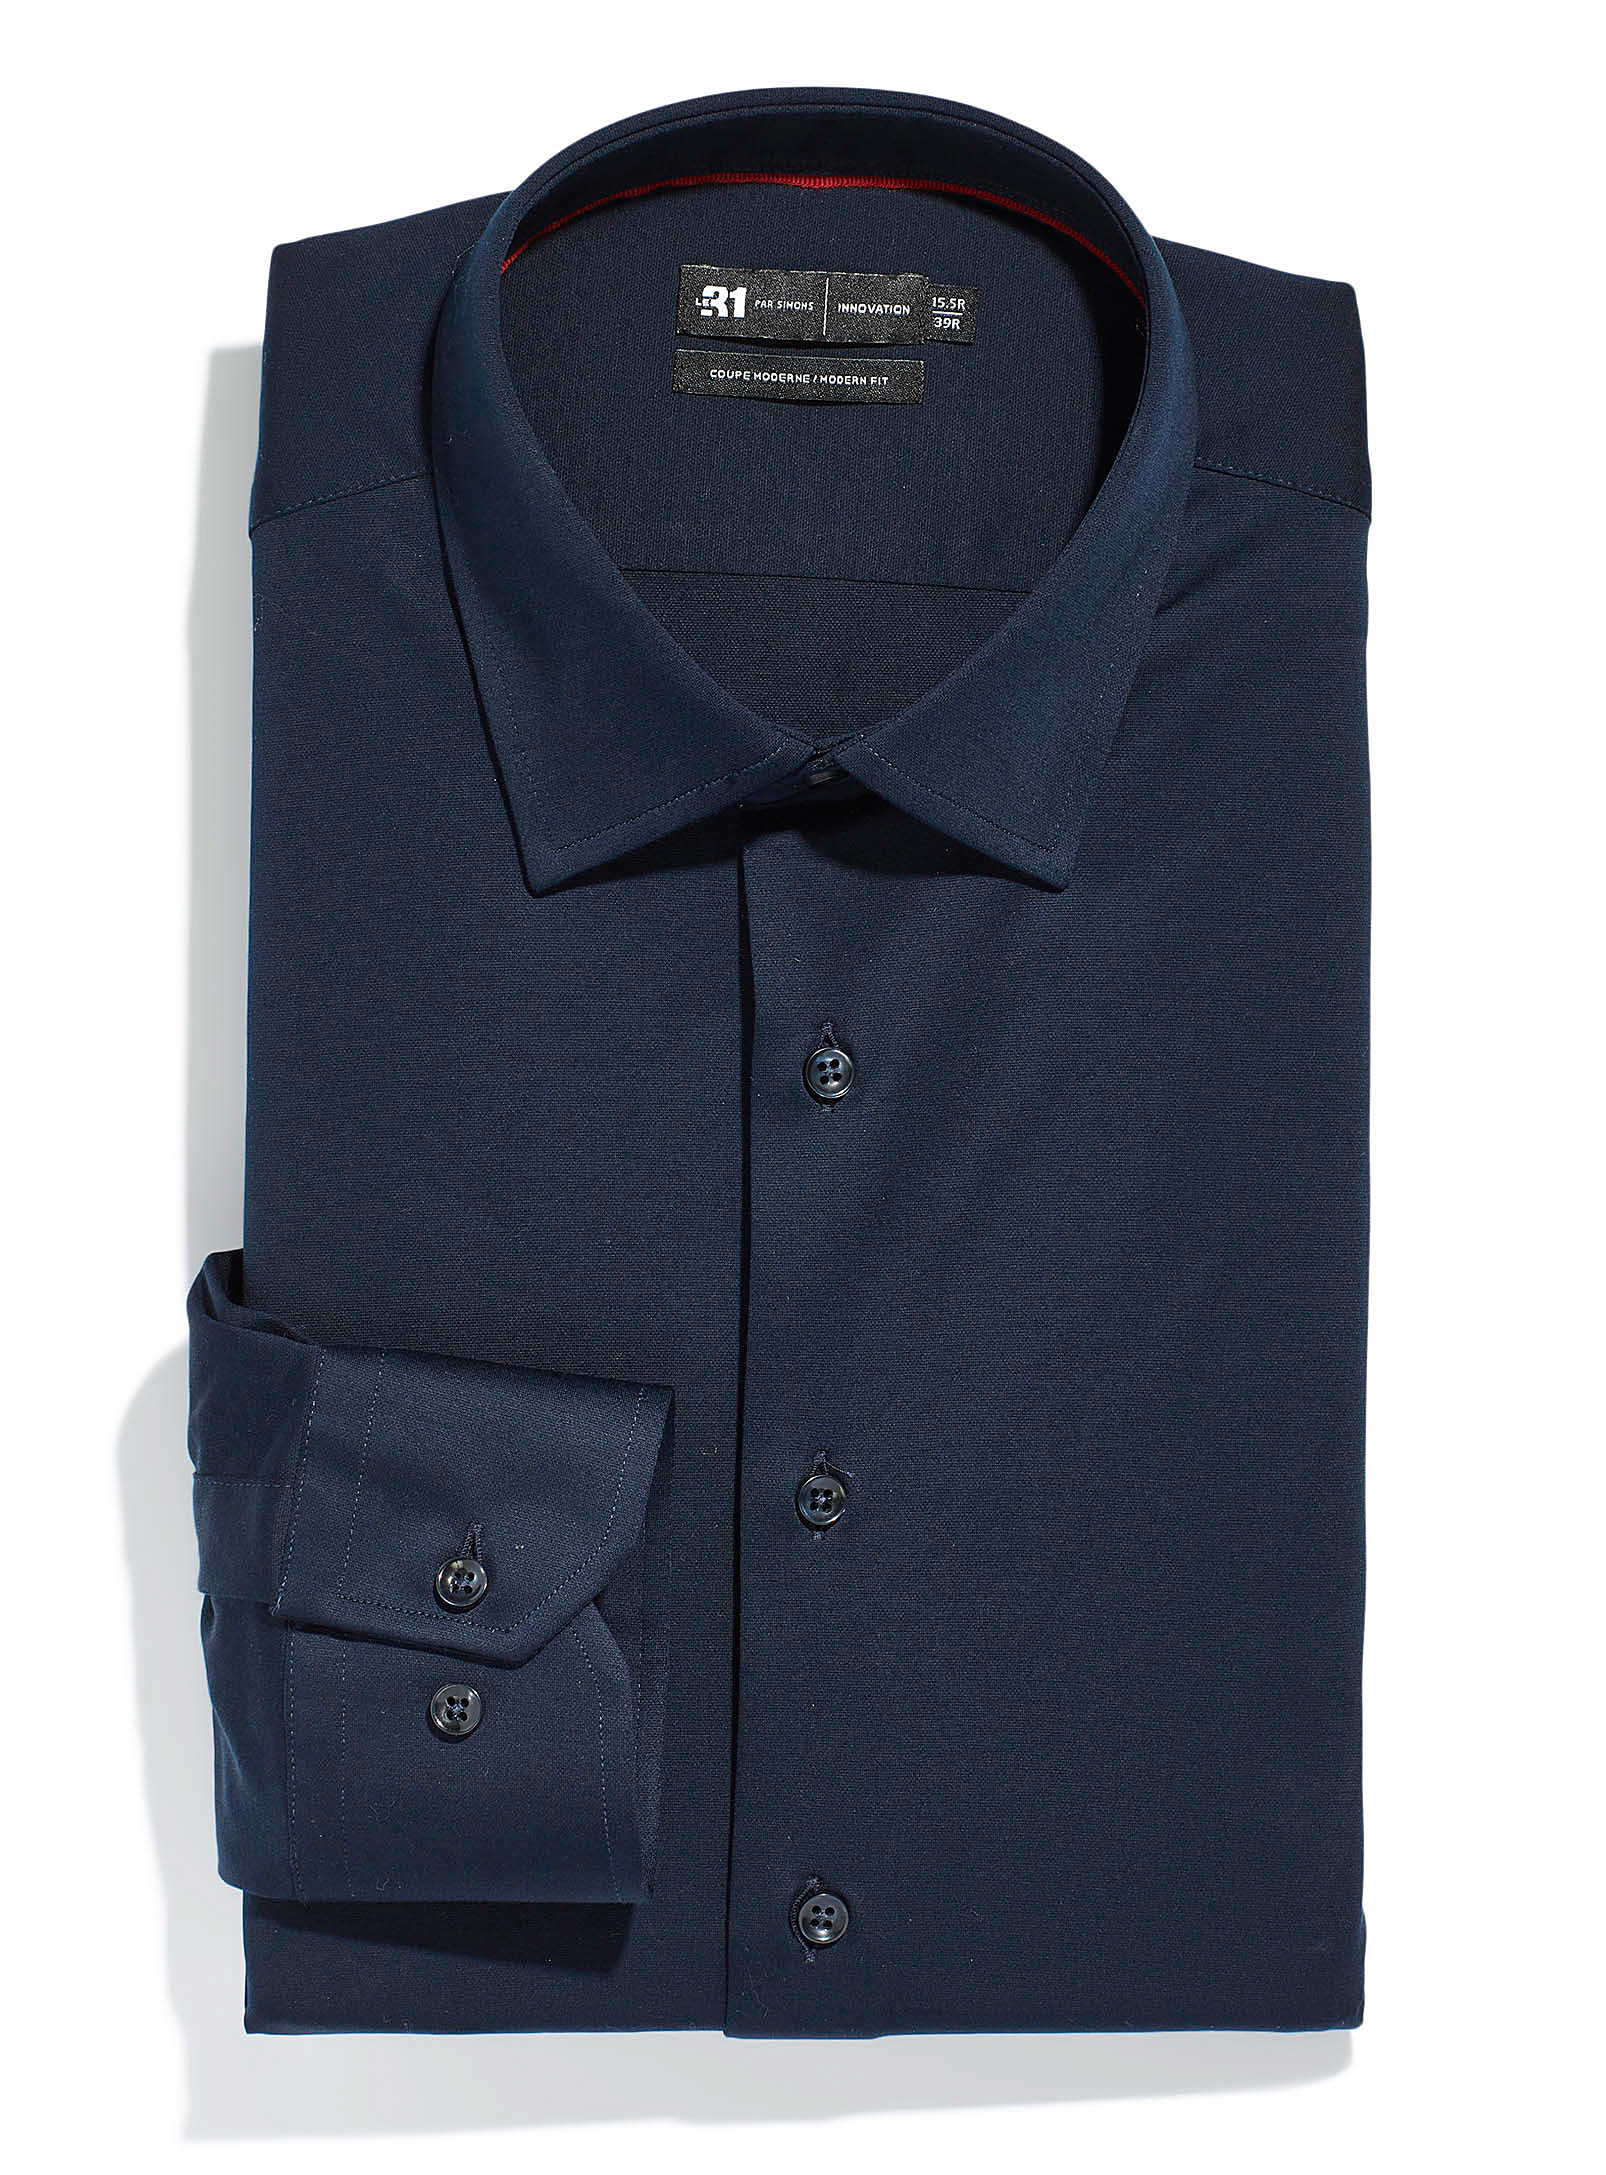 Le 31 Knit Shirt Modern Fit Innovation Collection In Marine Blue